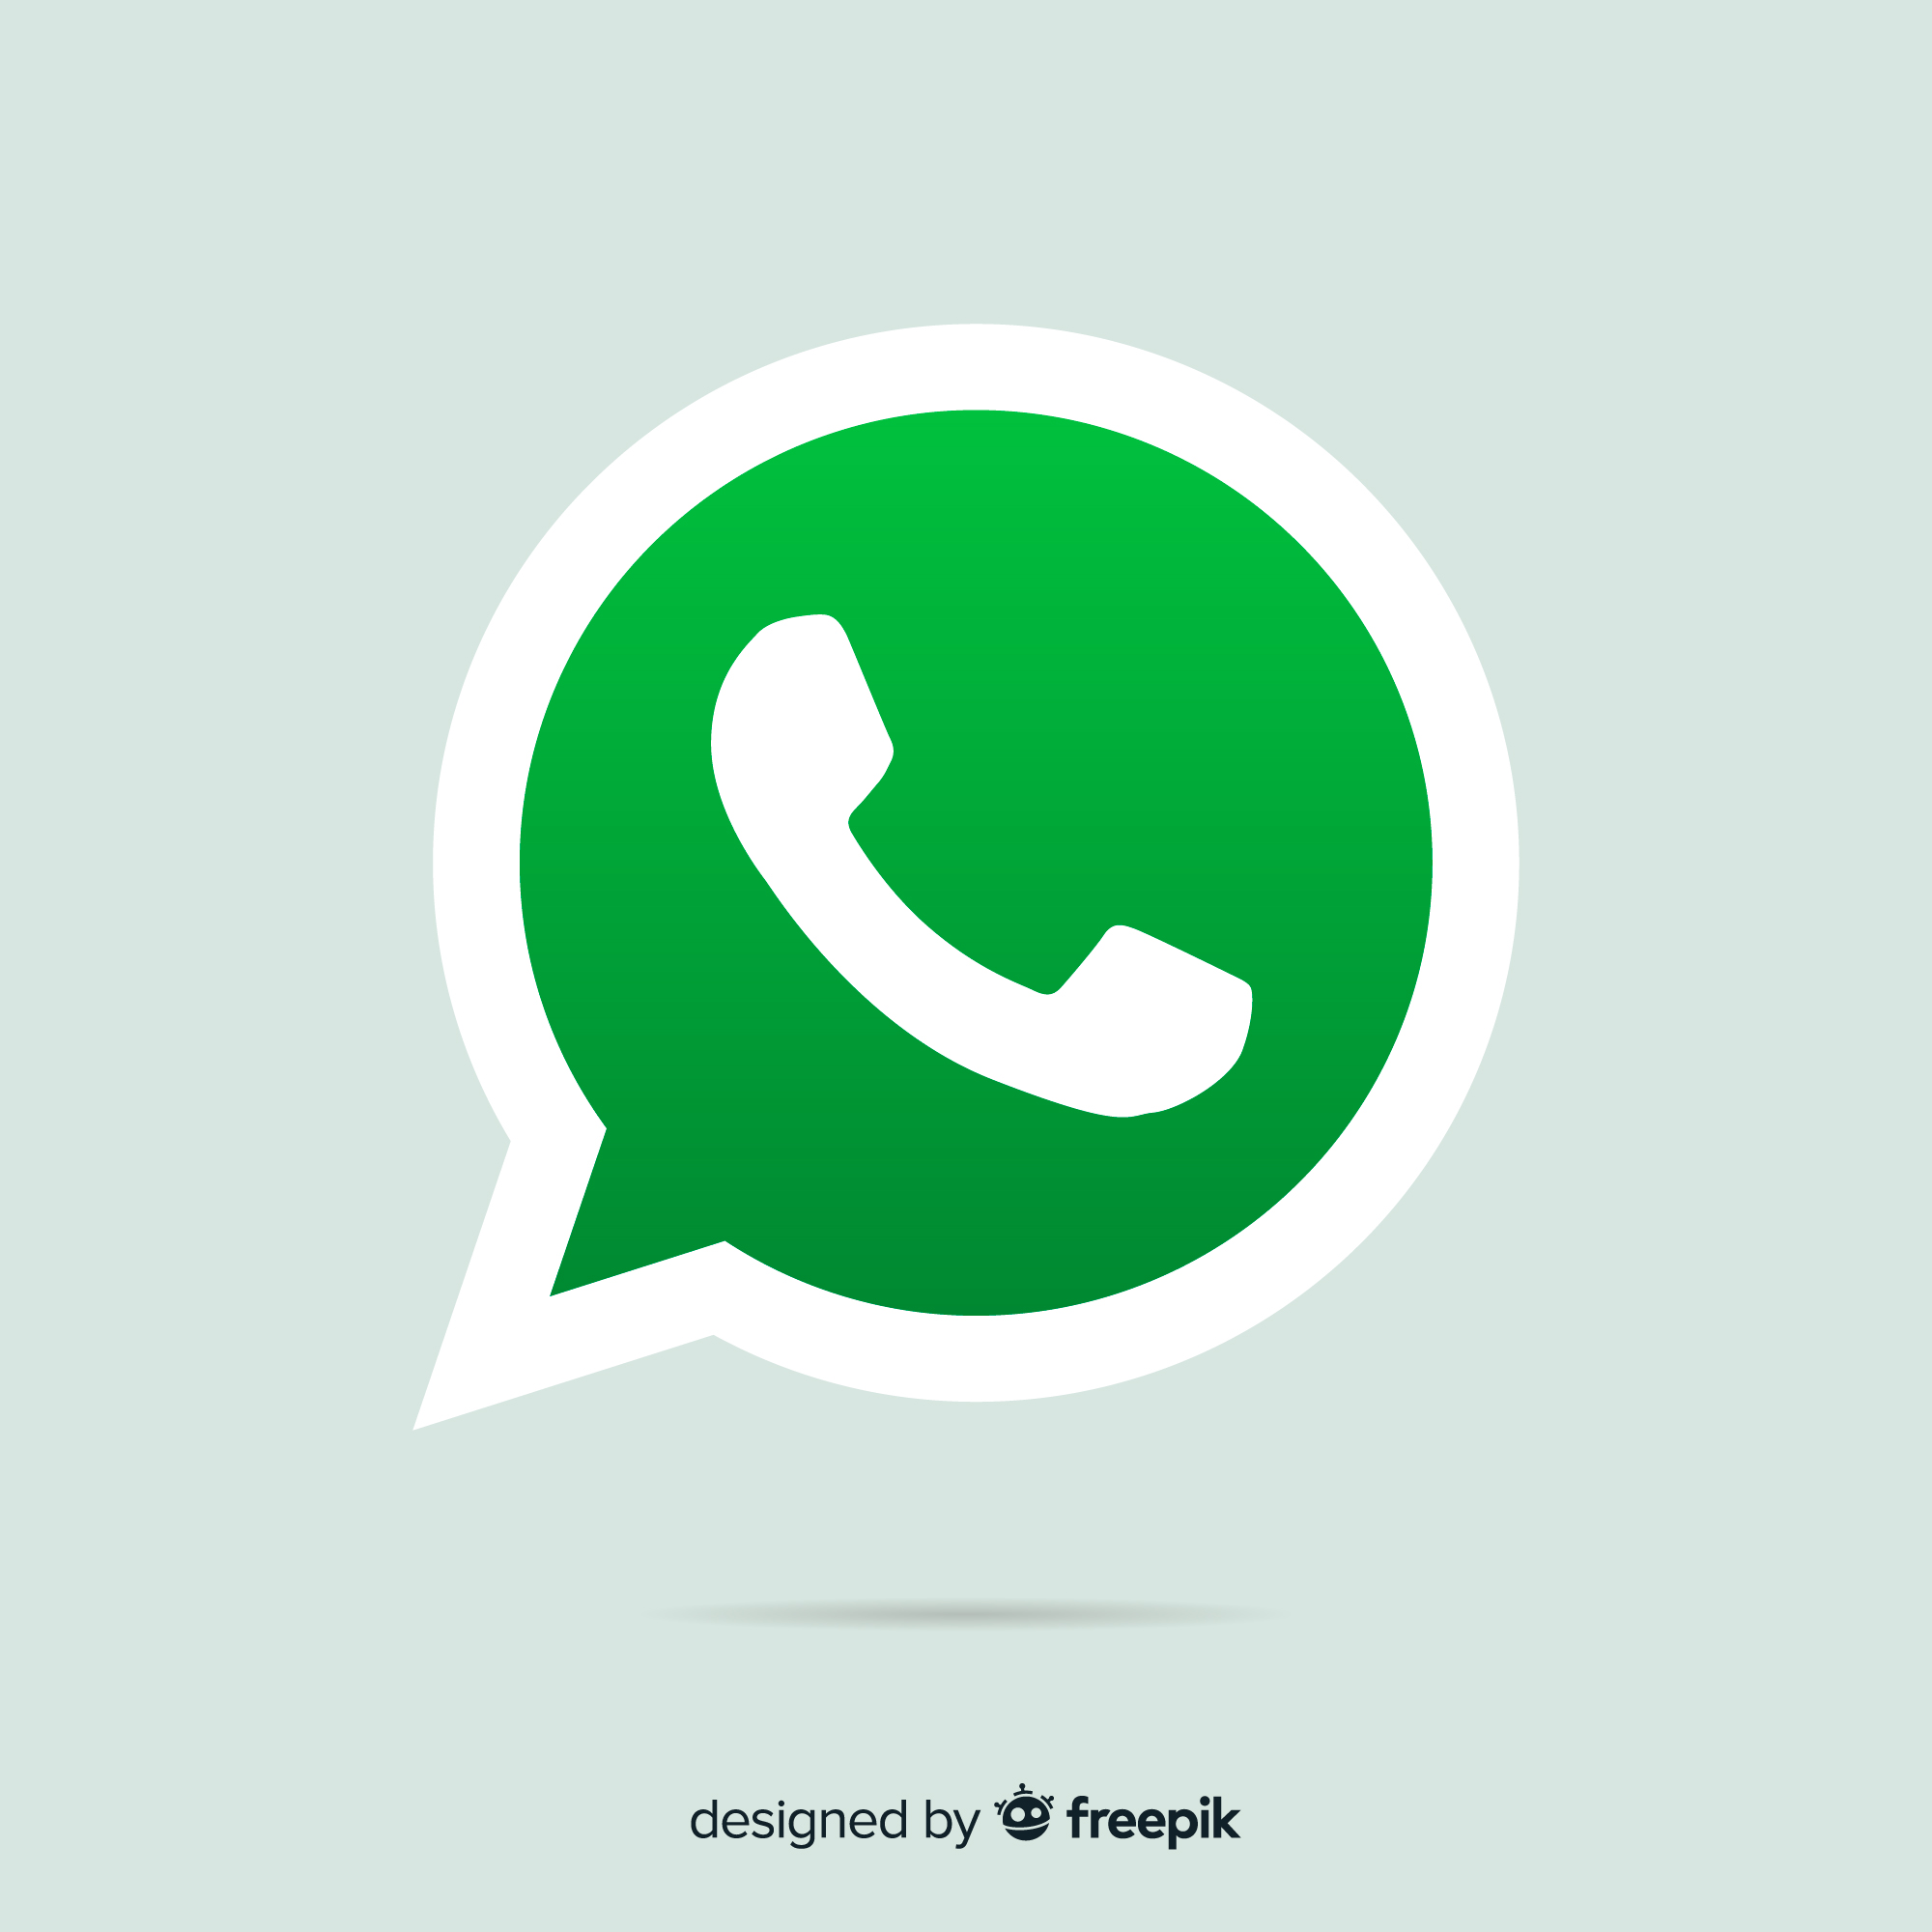 WhatsApp's Latest Beta Introduces Exciting New Voice Feature and Enhanced Group Moderation Tools